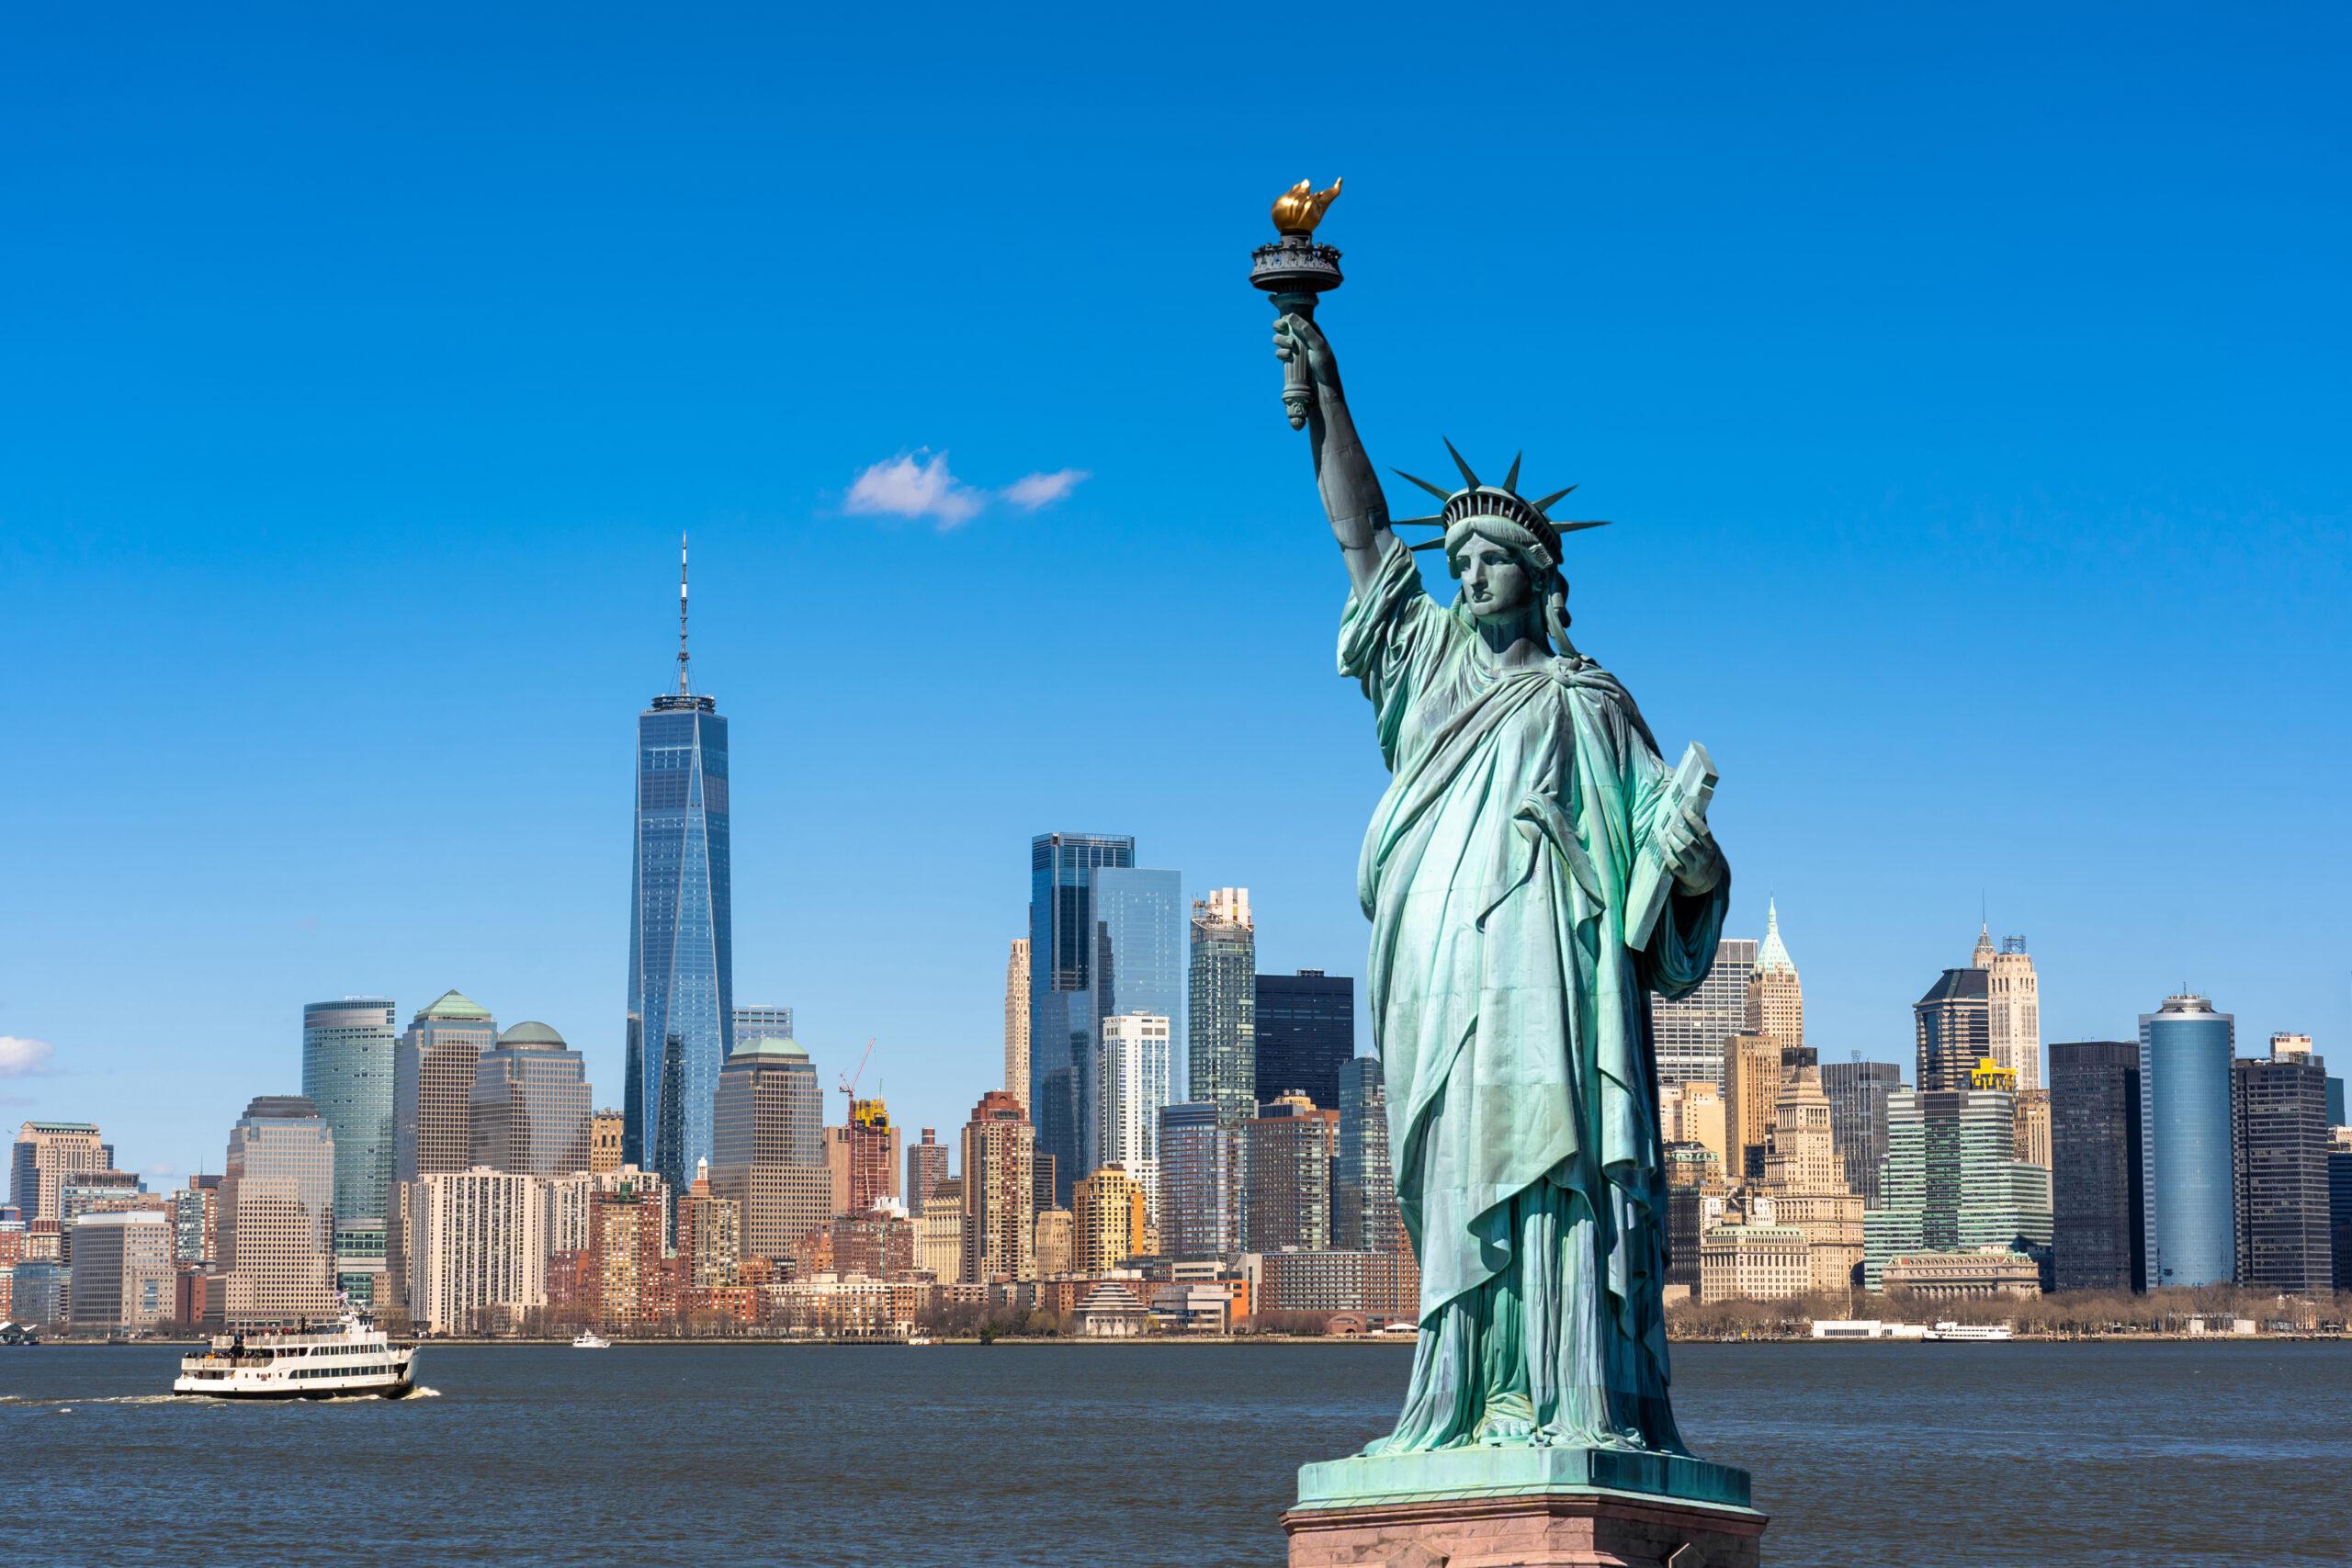 USA EB-5 investor visa: investment amount, requirements, additional costs